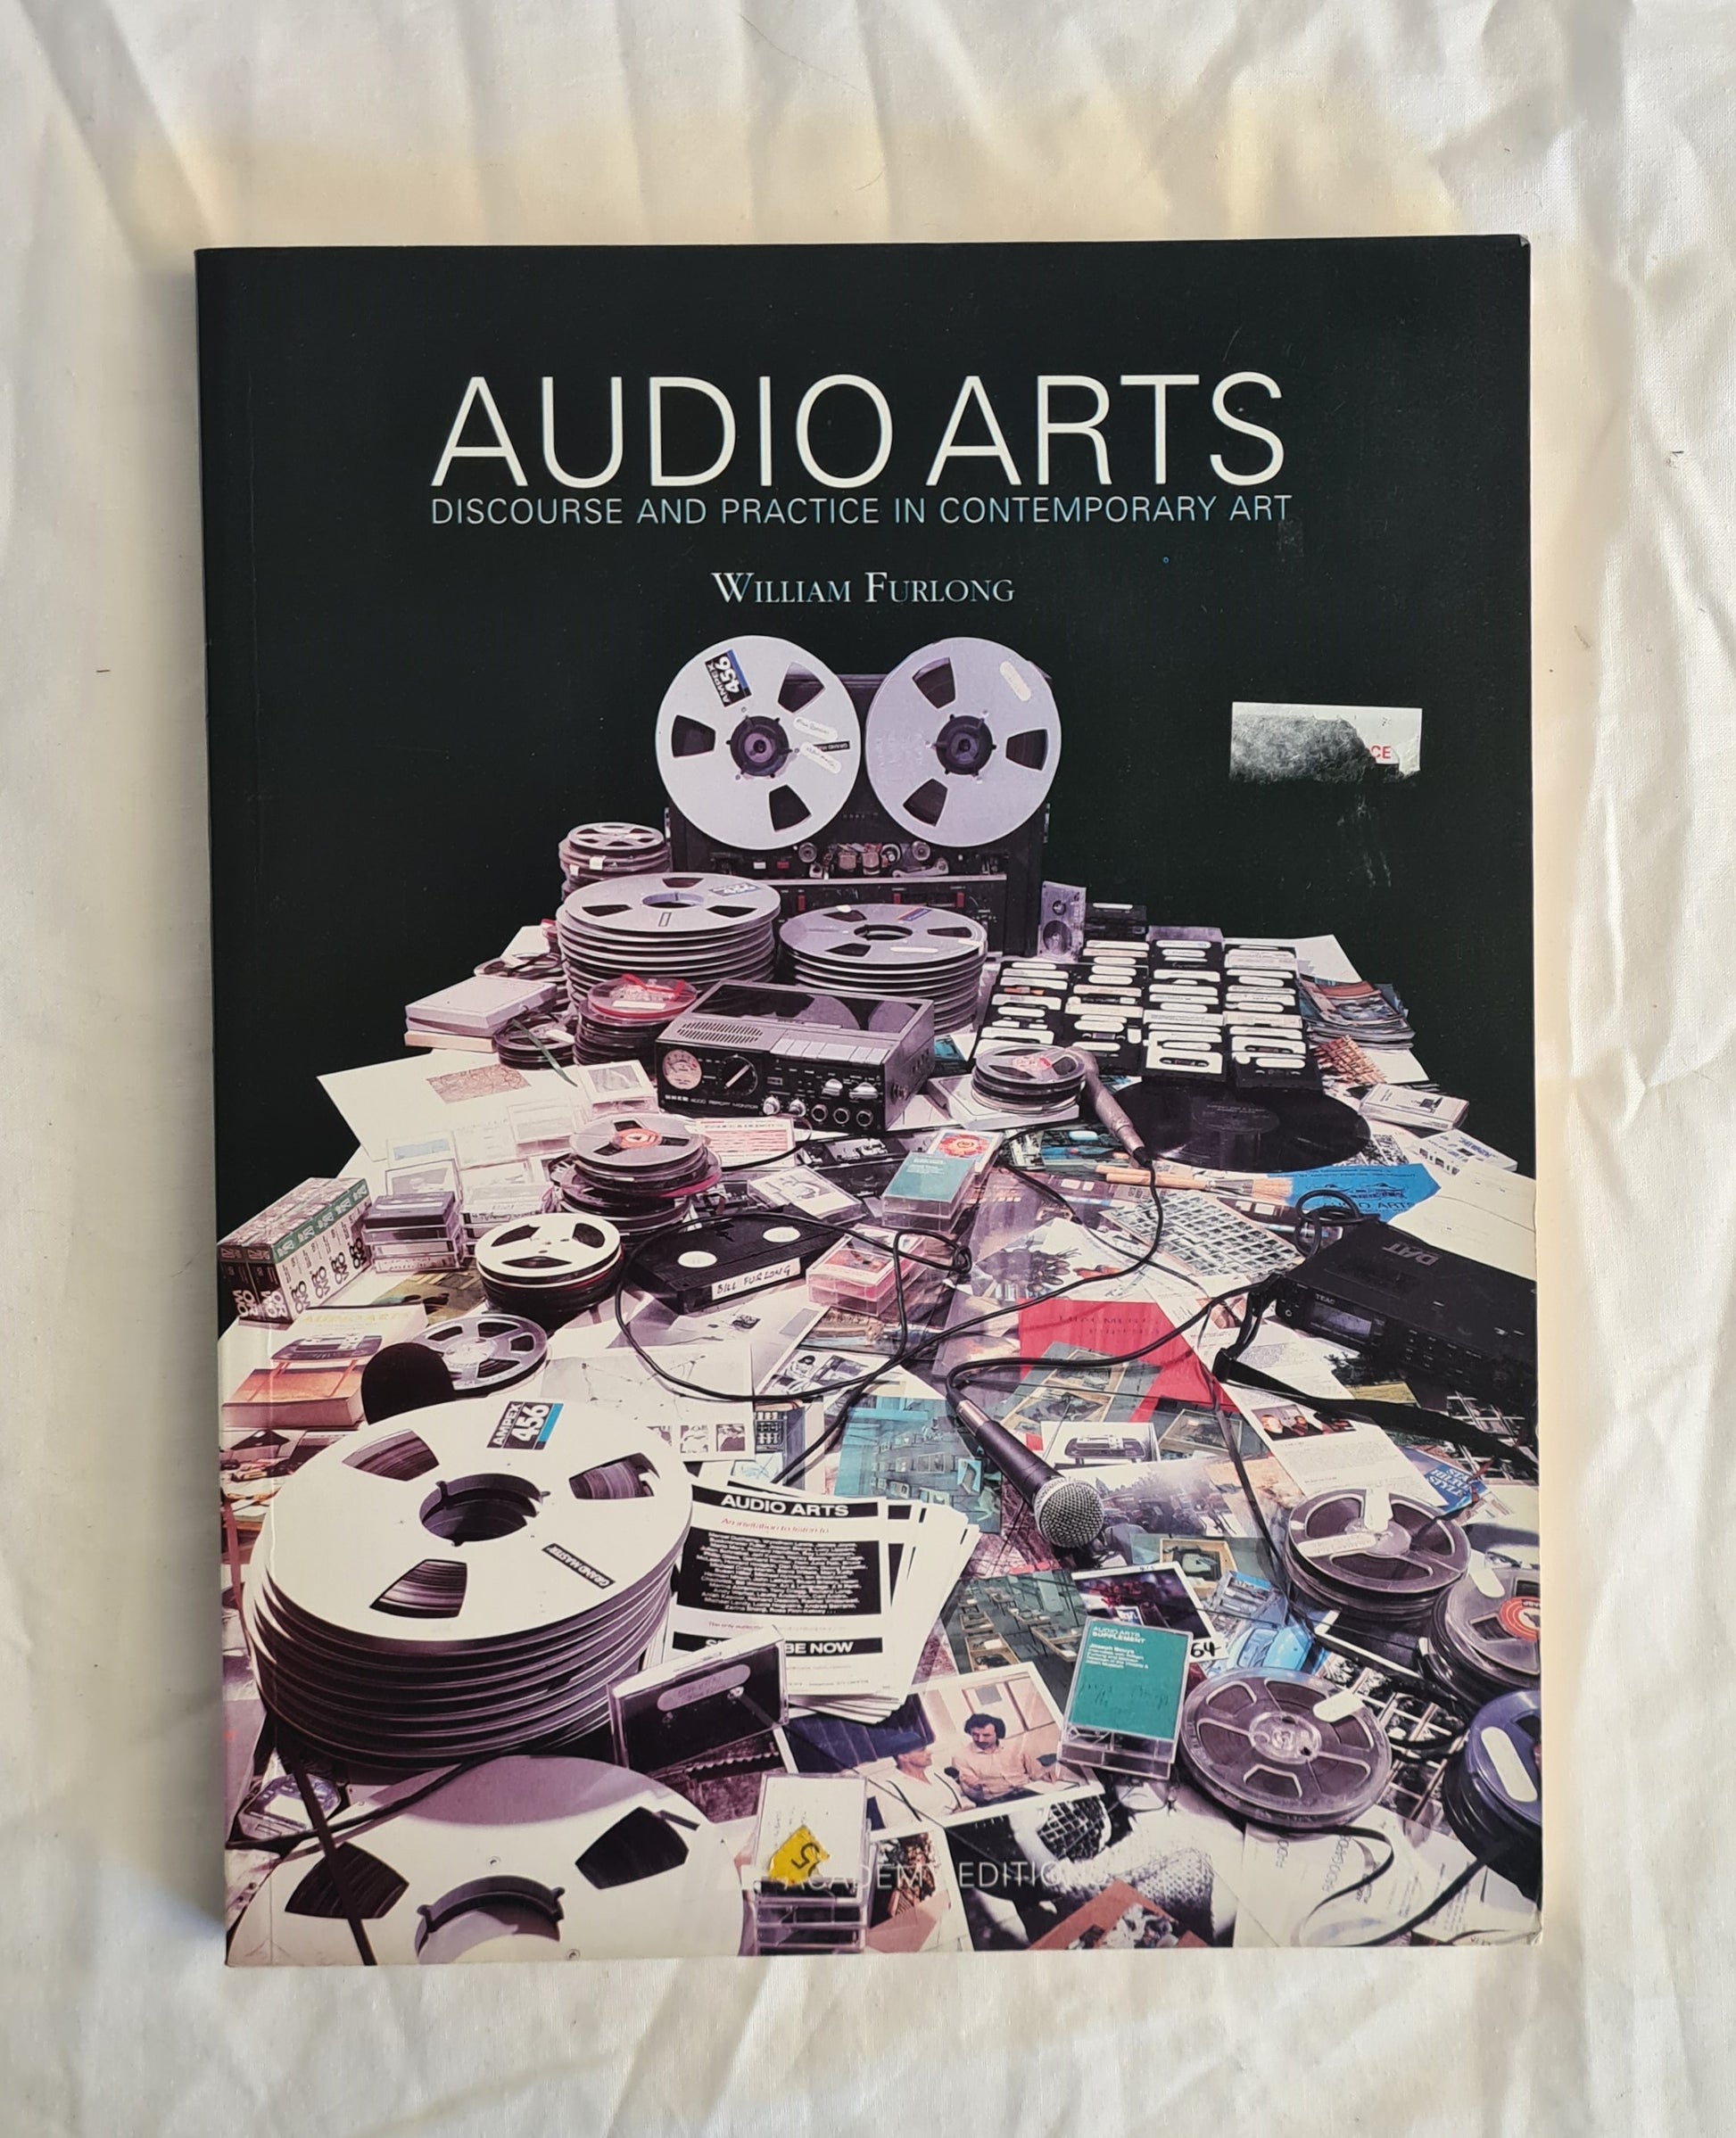 Audio Arts  Discourse and Practice in Contemporary Art  by William Furlong